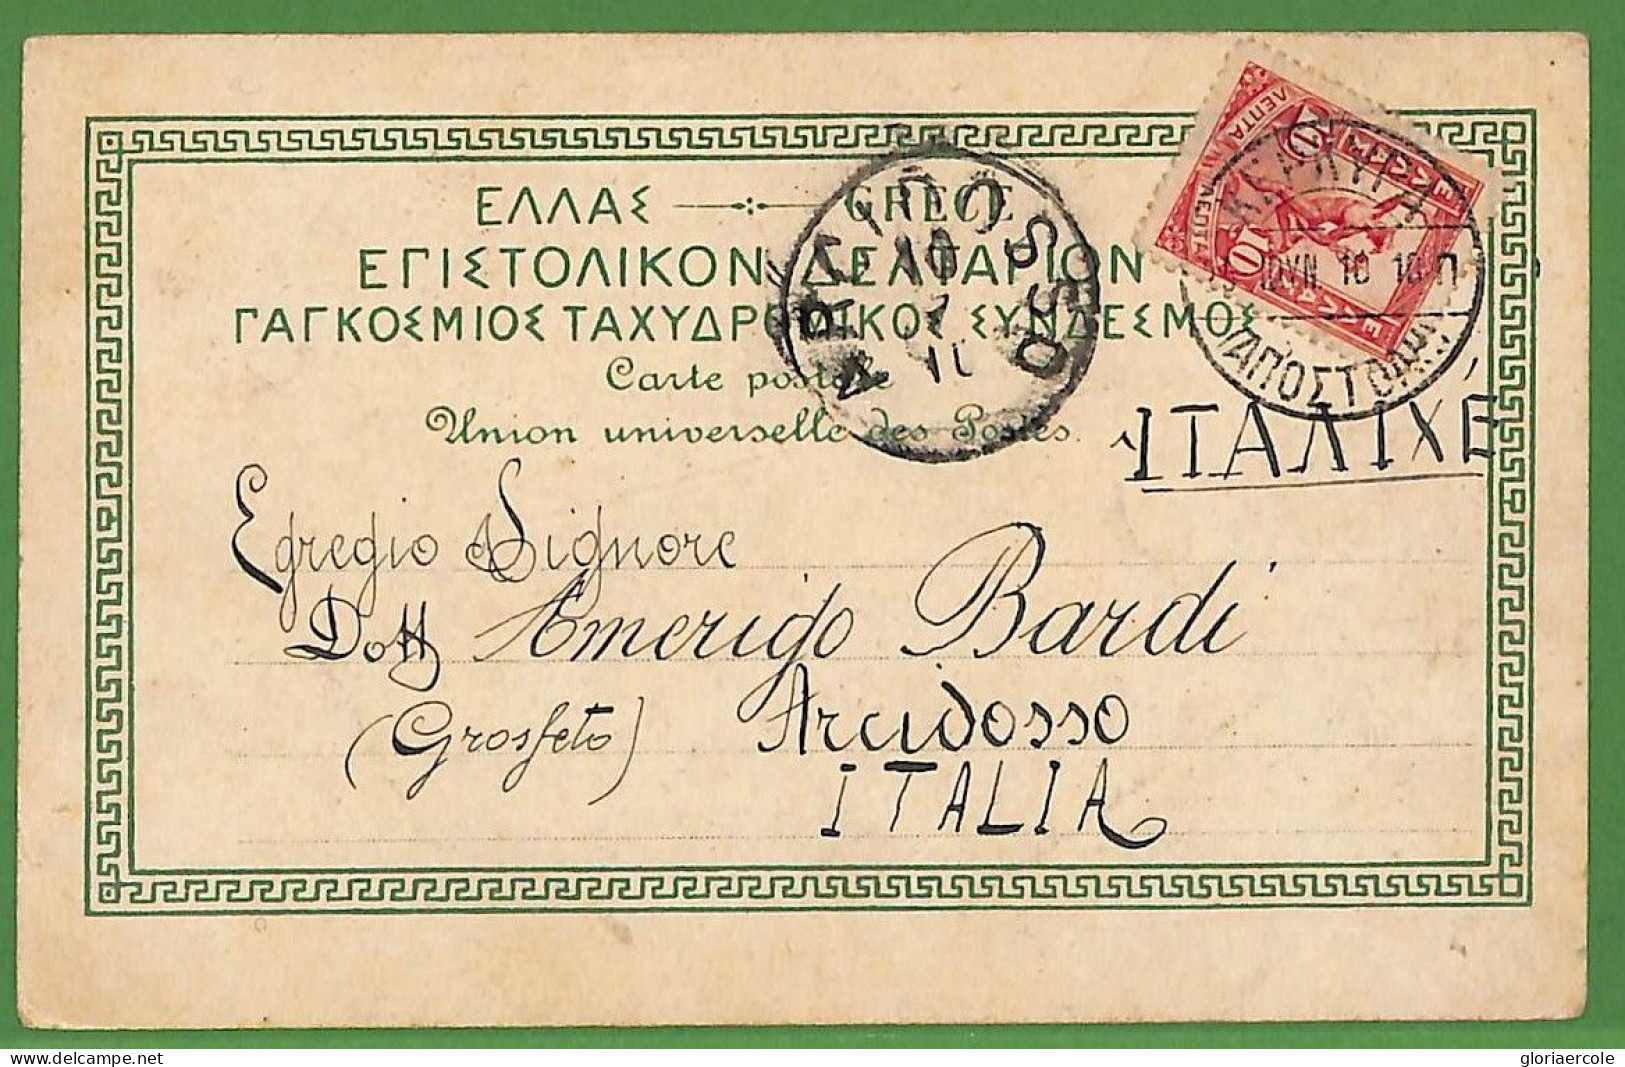 Ad0869 - GREECE - Postal History - Single Flying Mercury On POSTCARD To ITALY 1910 - Lettres & Documents